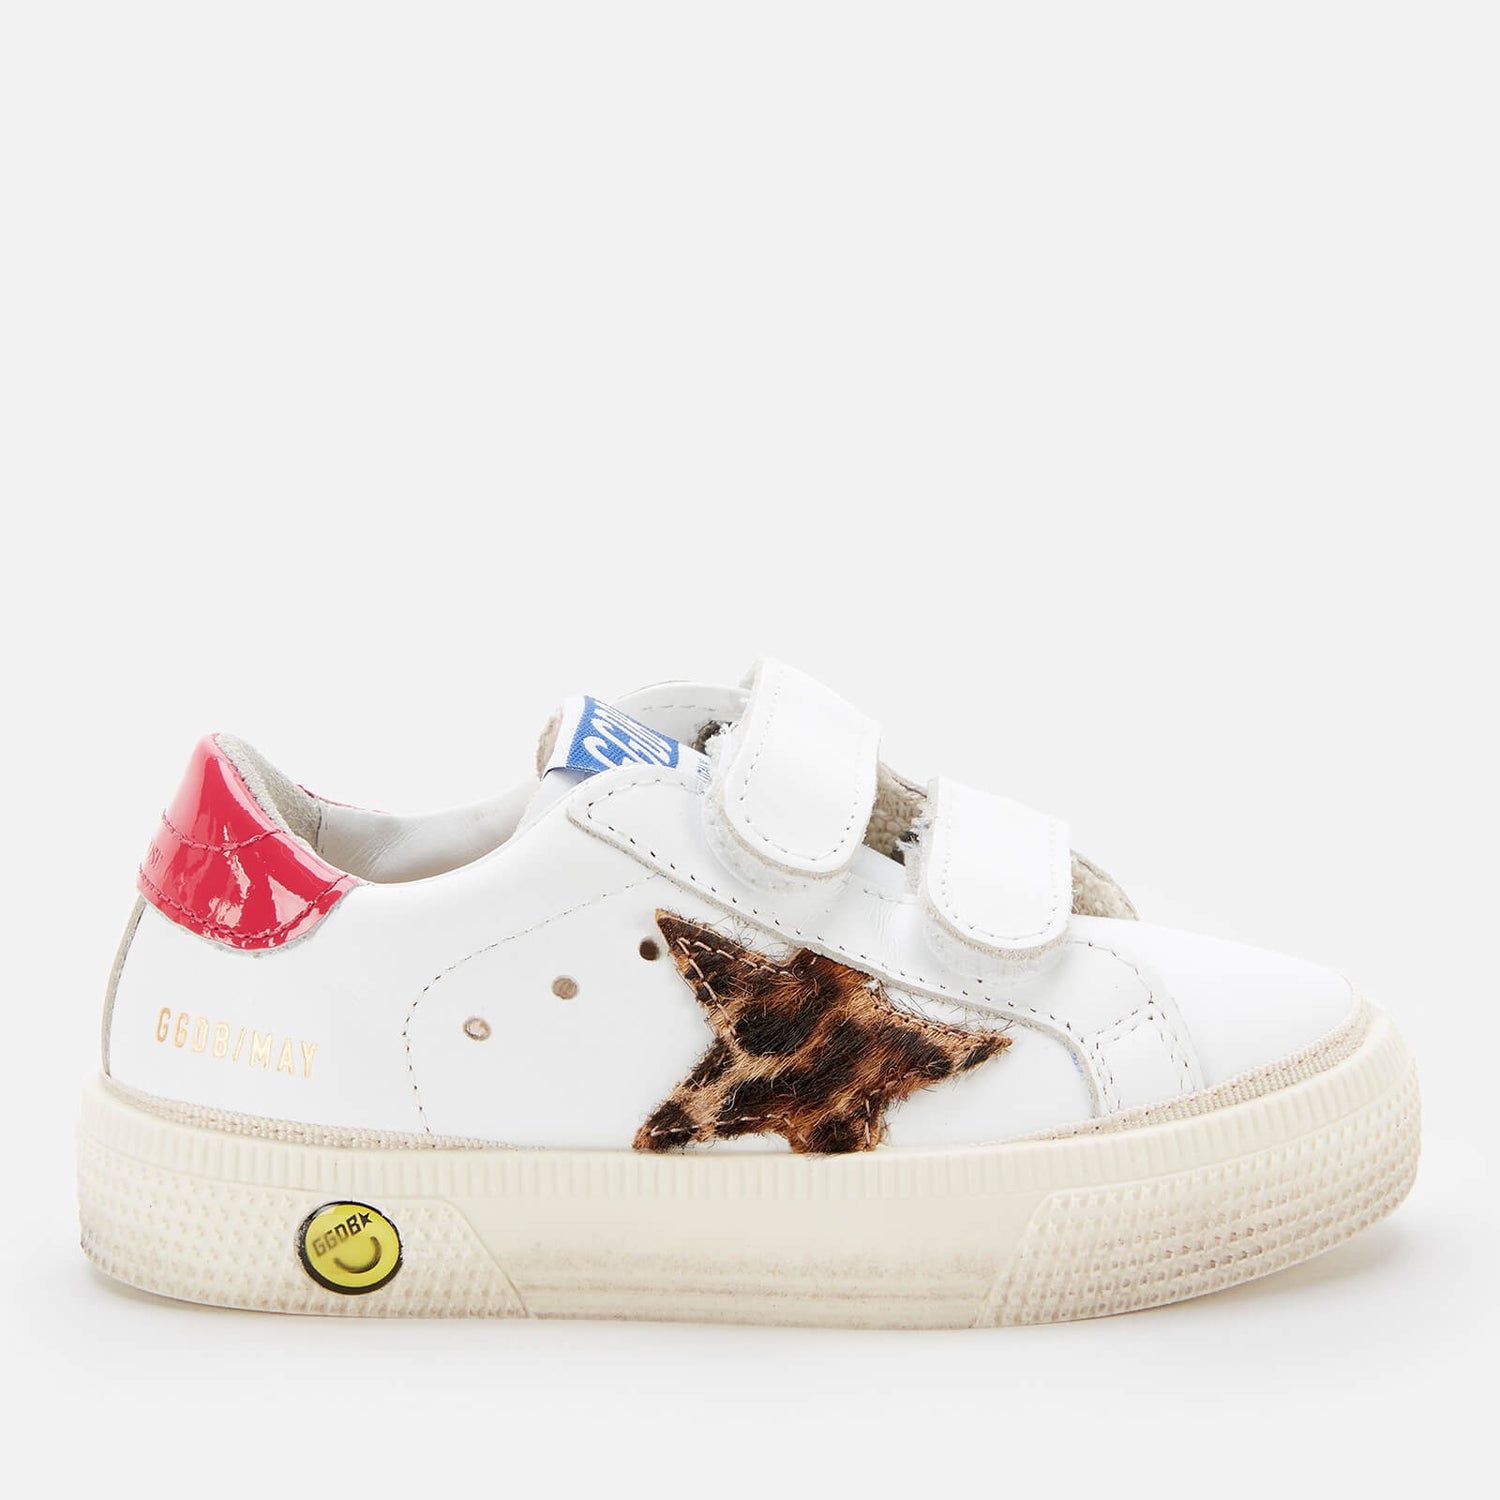 Golden Goose Toddlers' Leather Upper And Stripes Leopard Horsy Trainers - White/Beige Brown Leo/Fuxia - UK 3 Infant